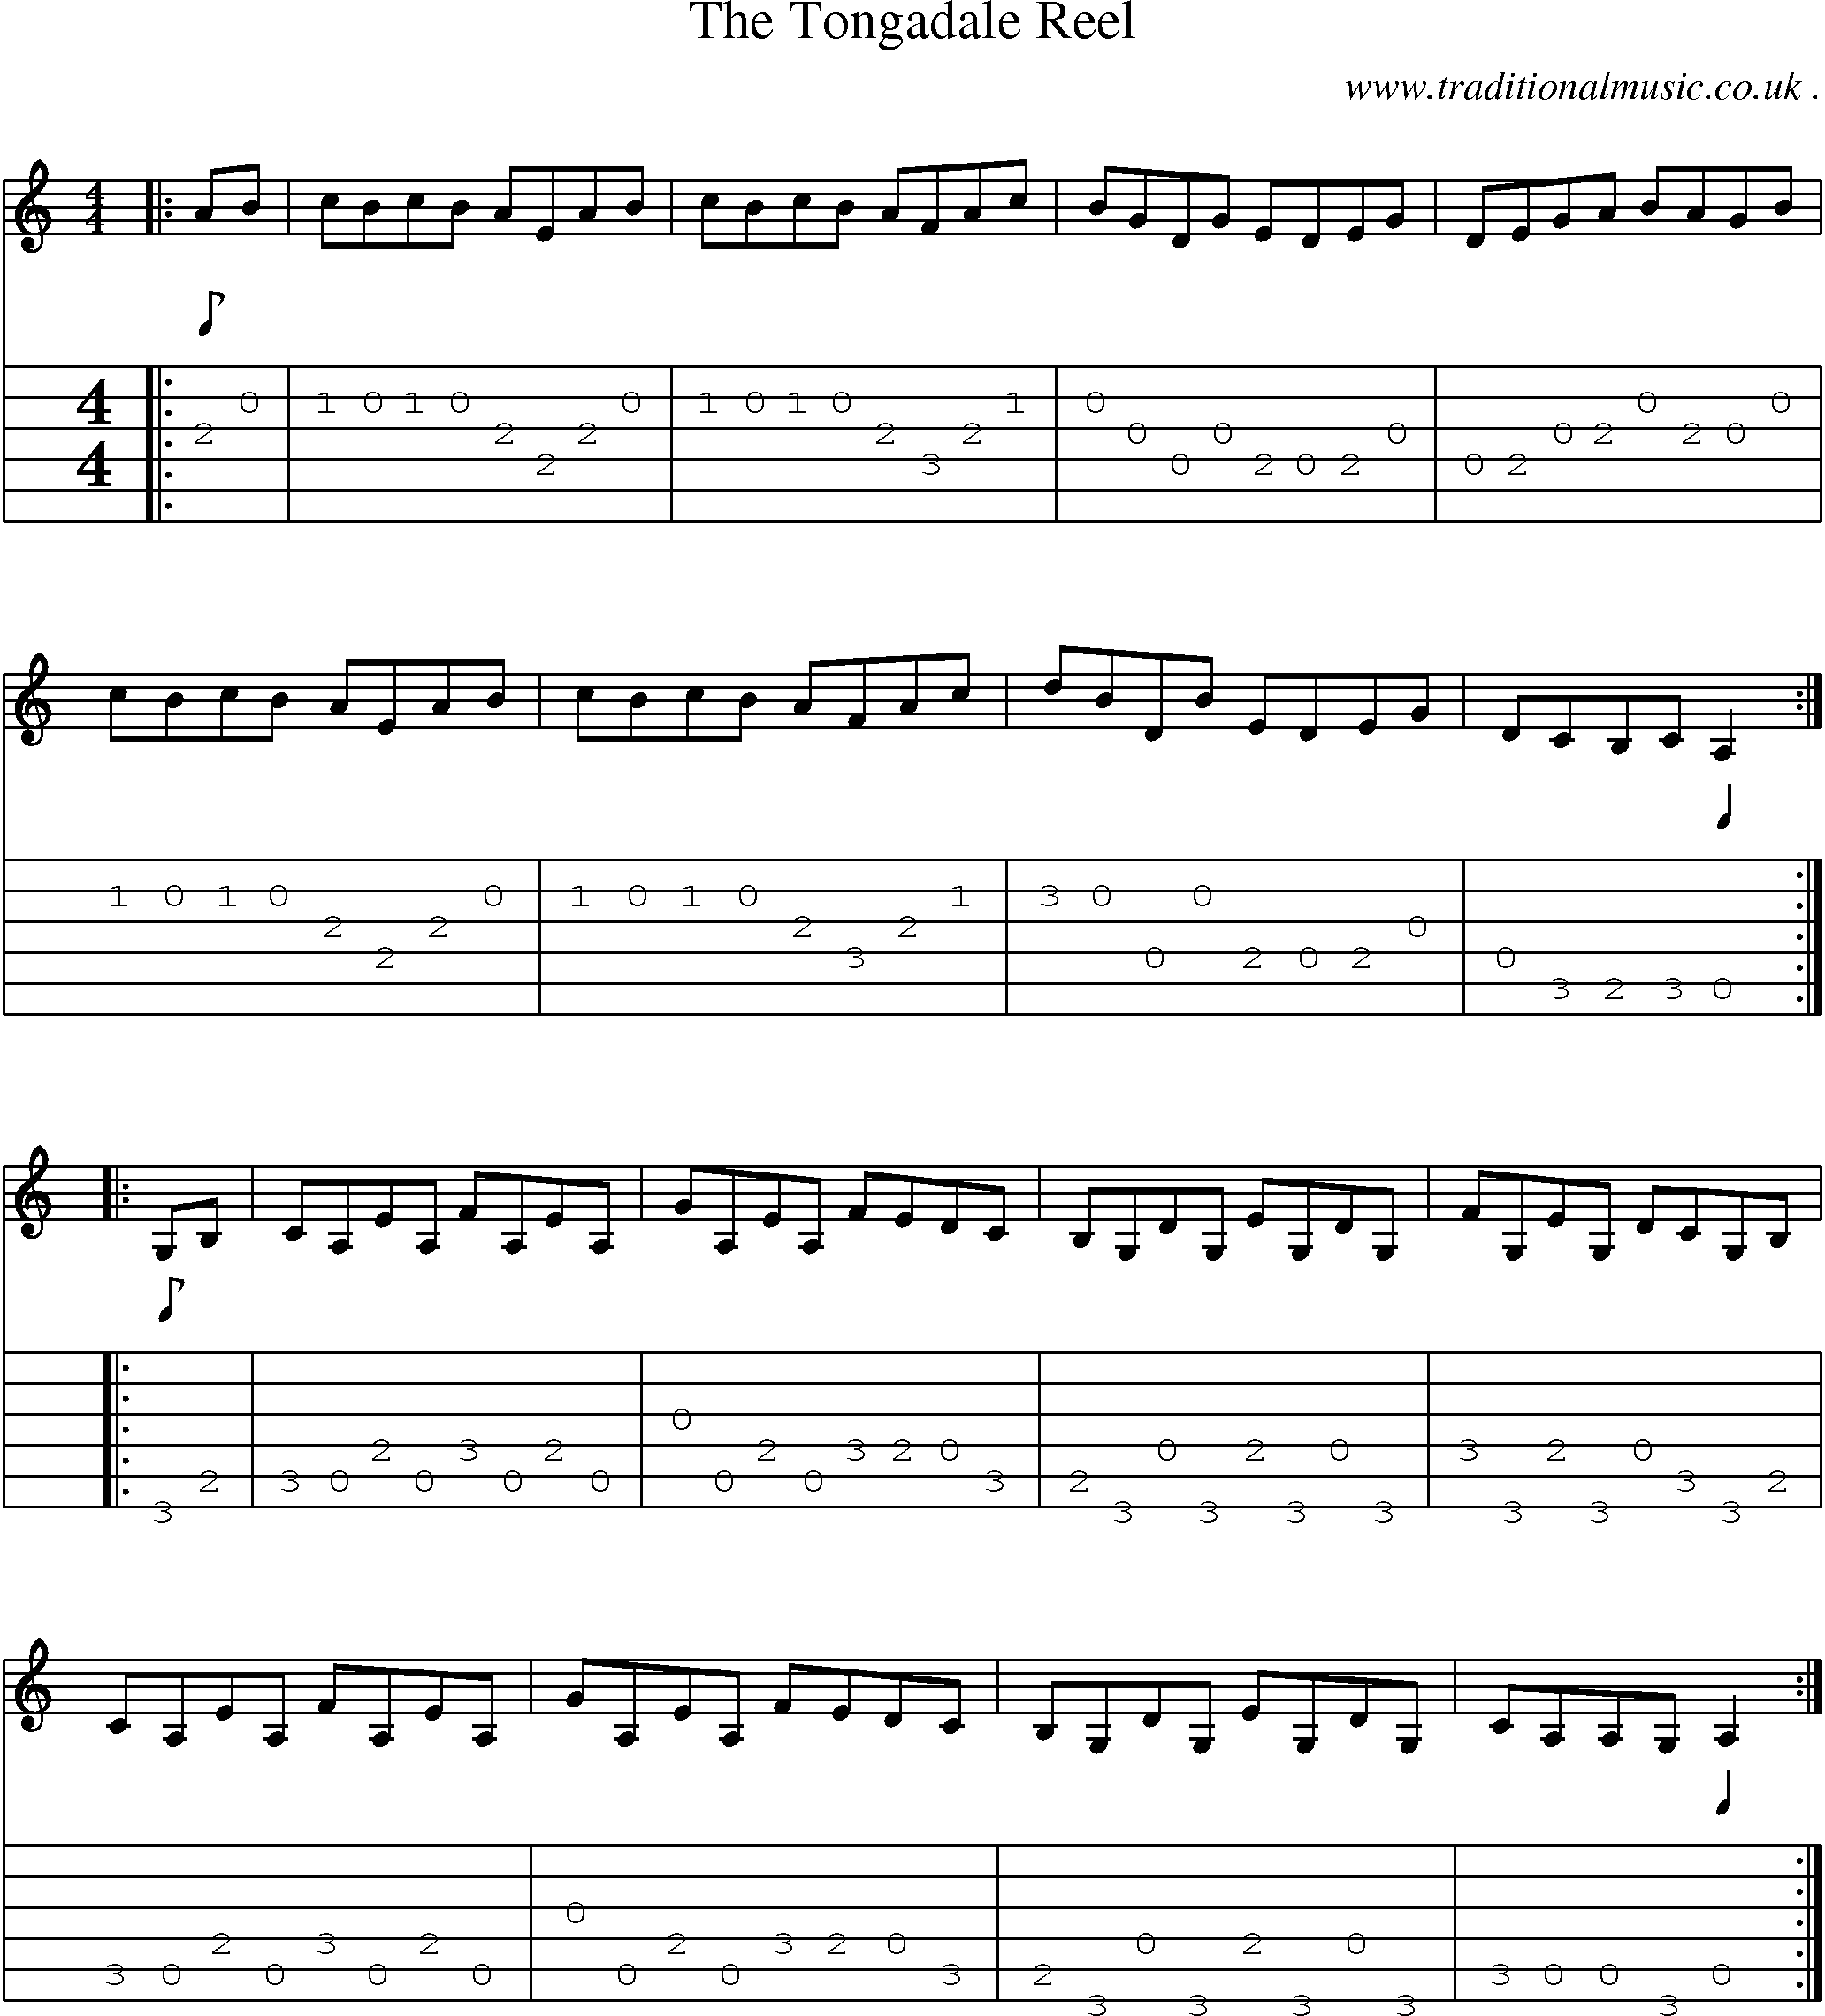 Sheet-Music and Guitar Tabs for The Tongadale Reel